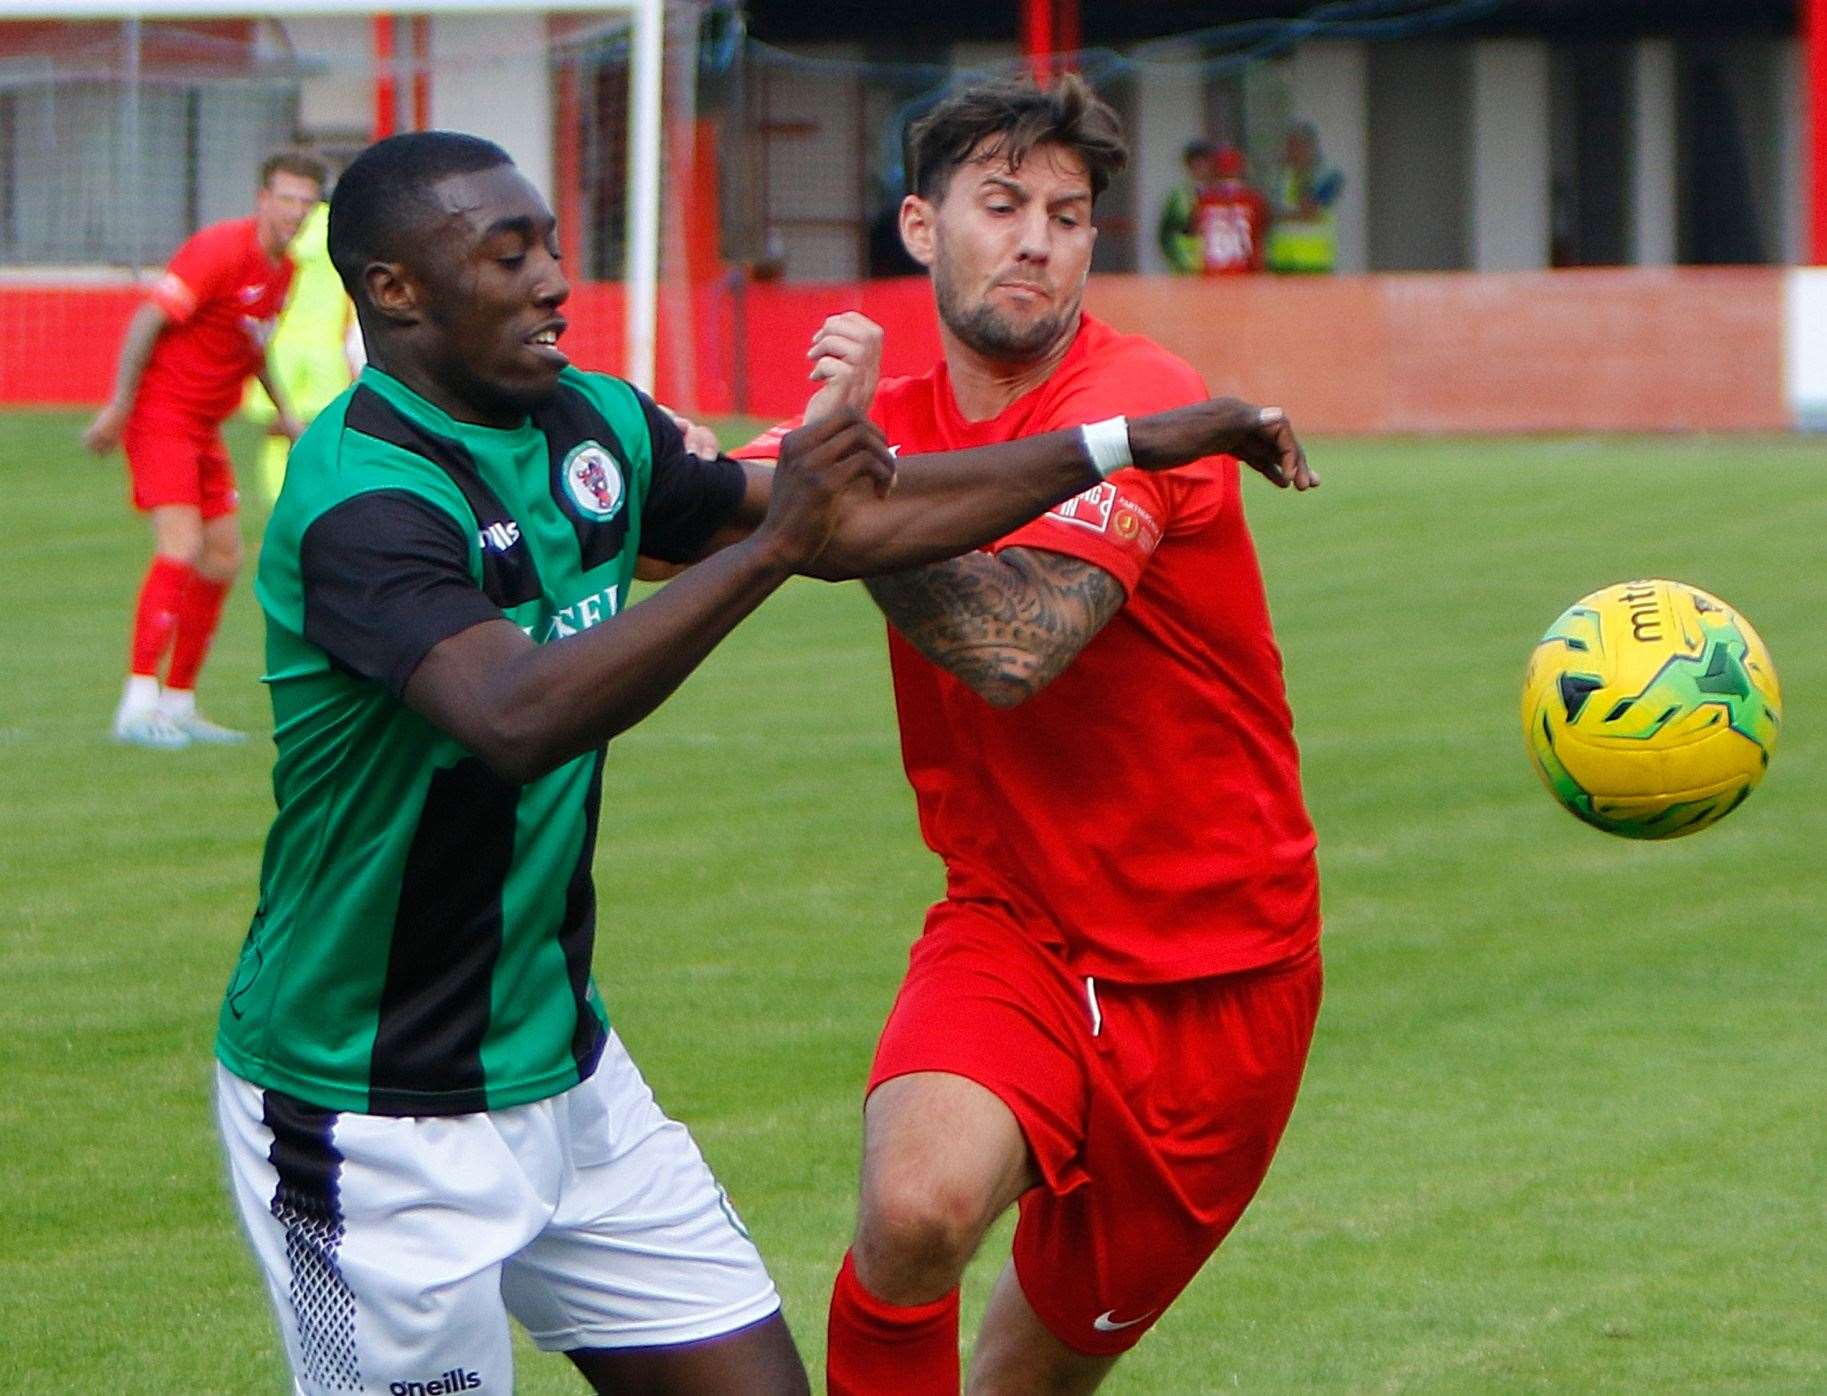 Hythe Town midfielder James Rogers is taking interim charge at Reachfields Picture: Barry Goodwin